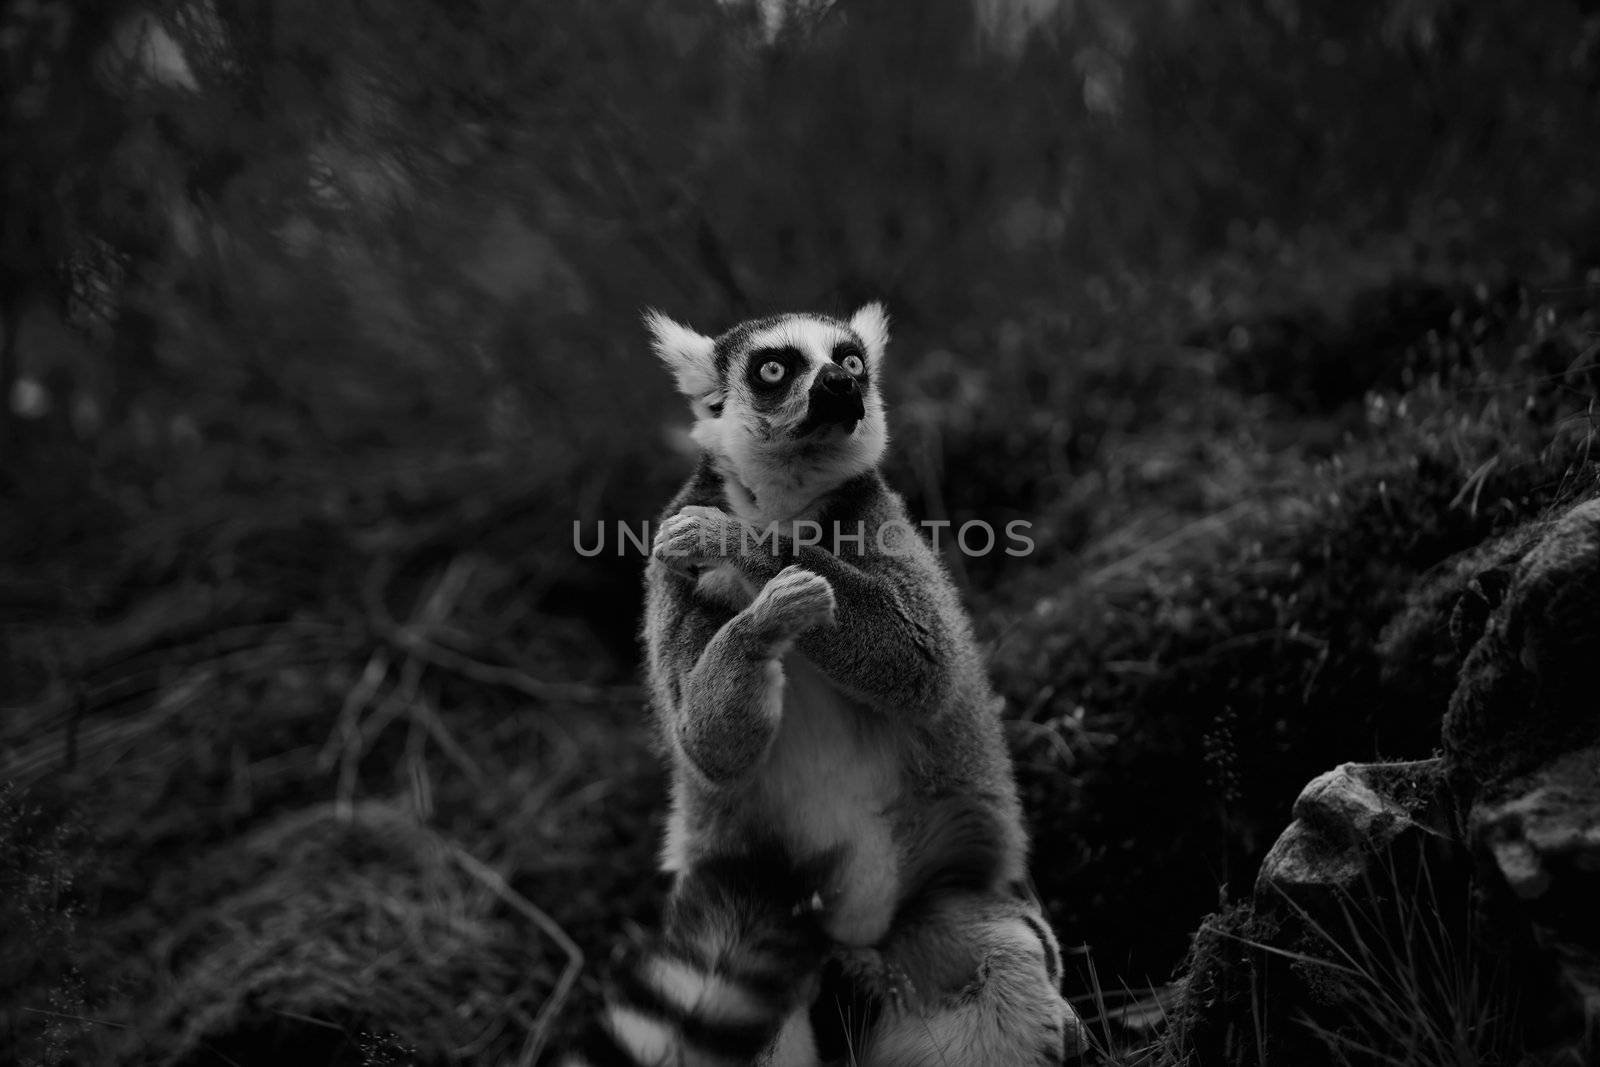 A ring-tailed lemur on guard against unexpected things in the night